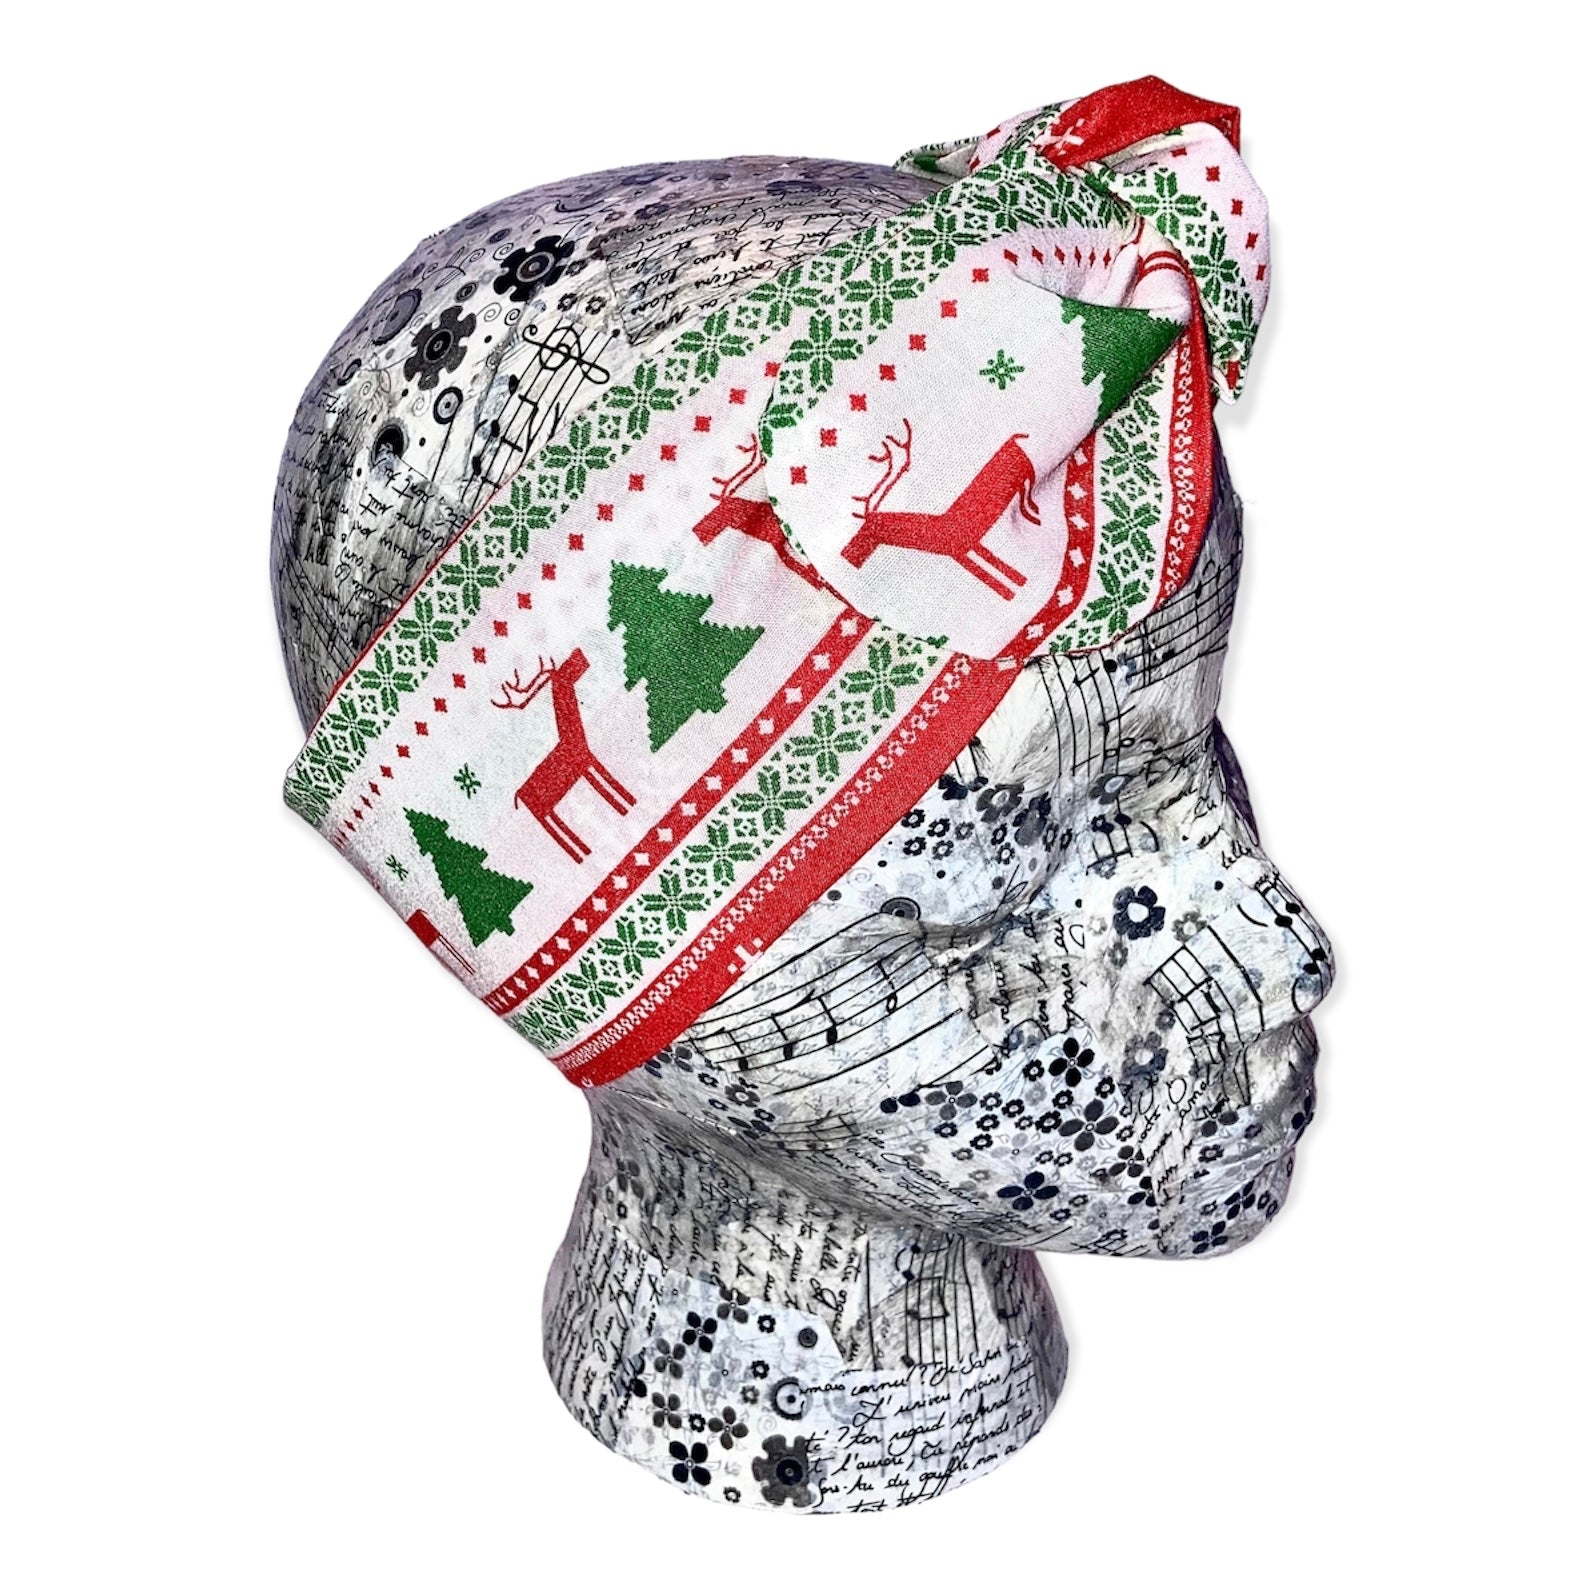 christmas headband in a traditional scandi christmas pattern. red reindeer, green trees, white background with red and green pattern border. Headbsnd is on a decorated polystyrene head and is tied on with a knotted bow towards the top